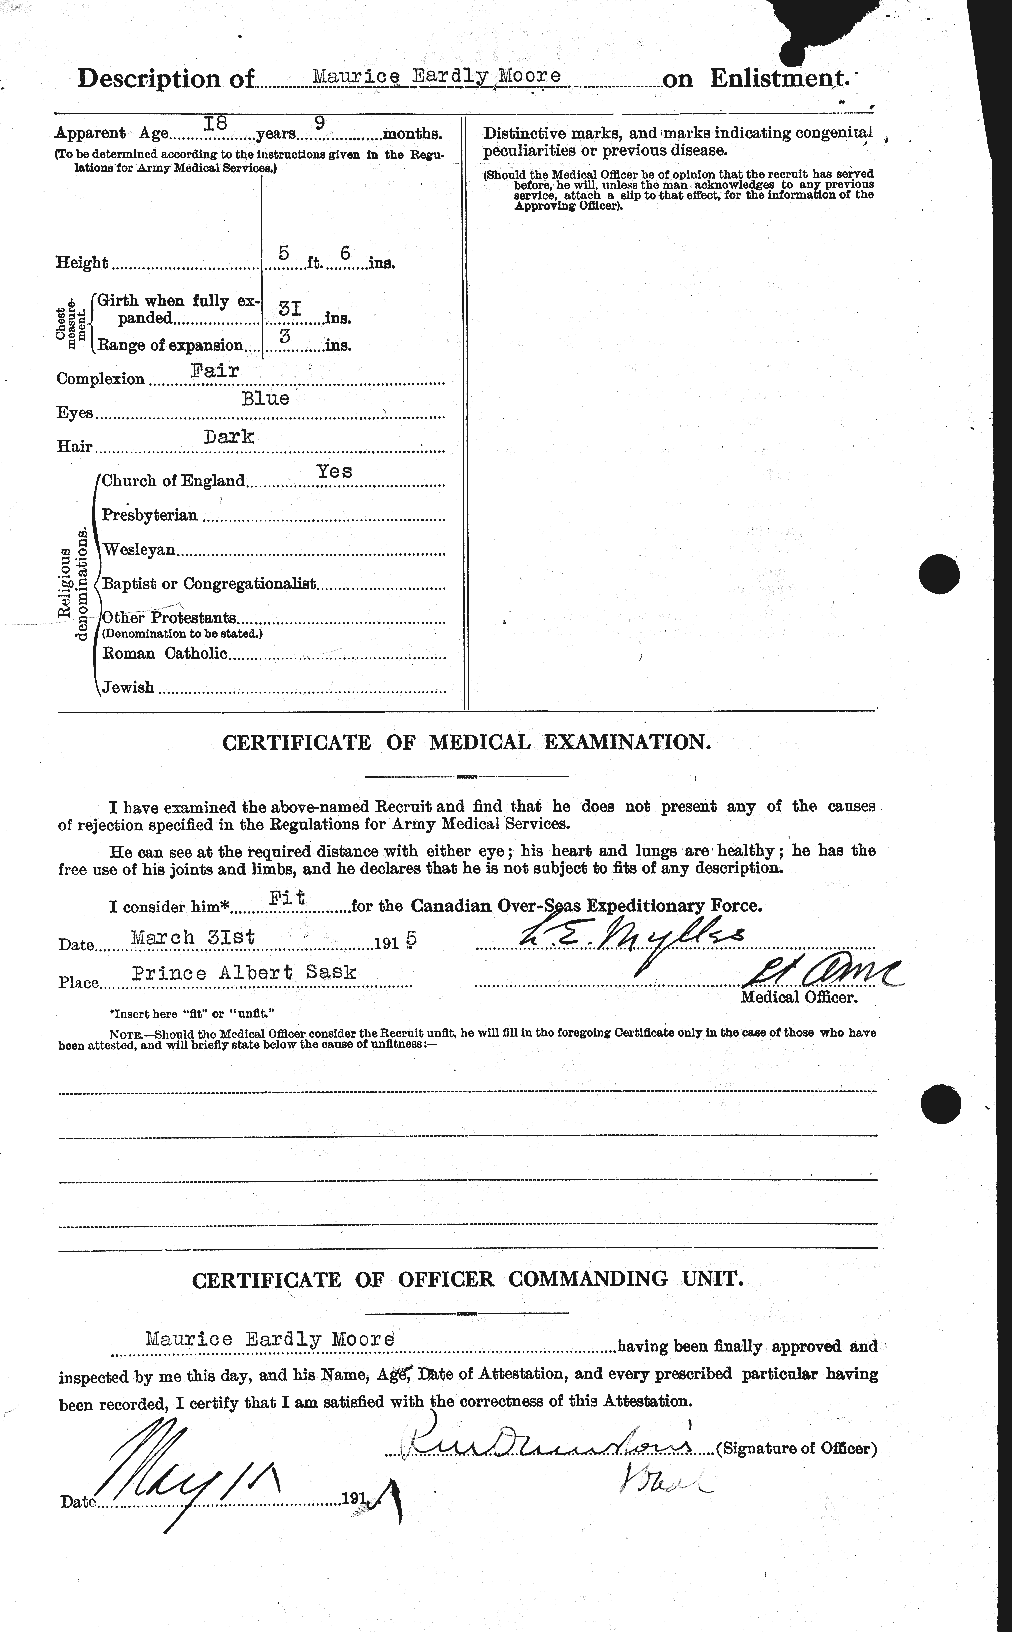 Personnel Records of the First World War - CEF 503433b